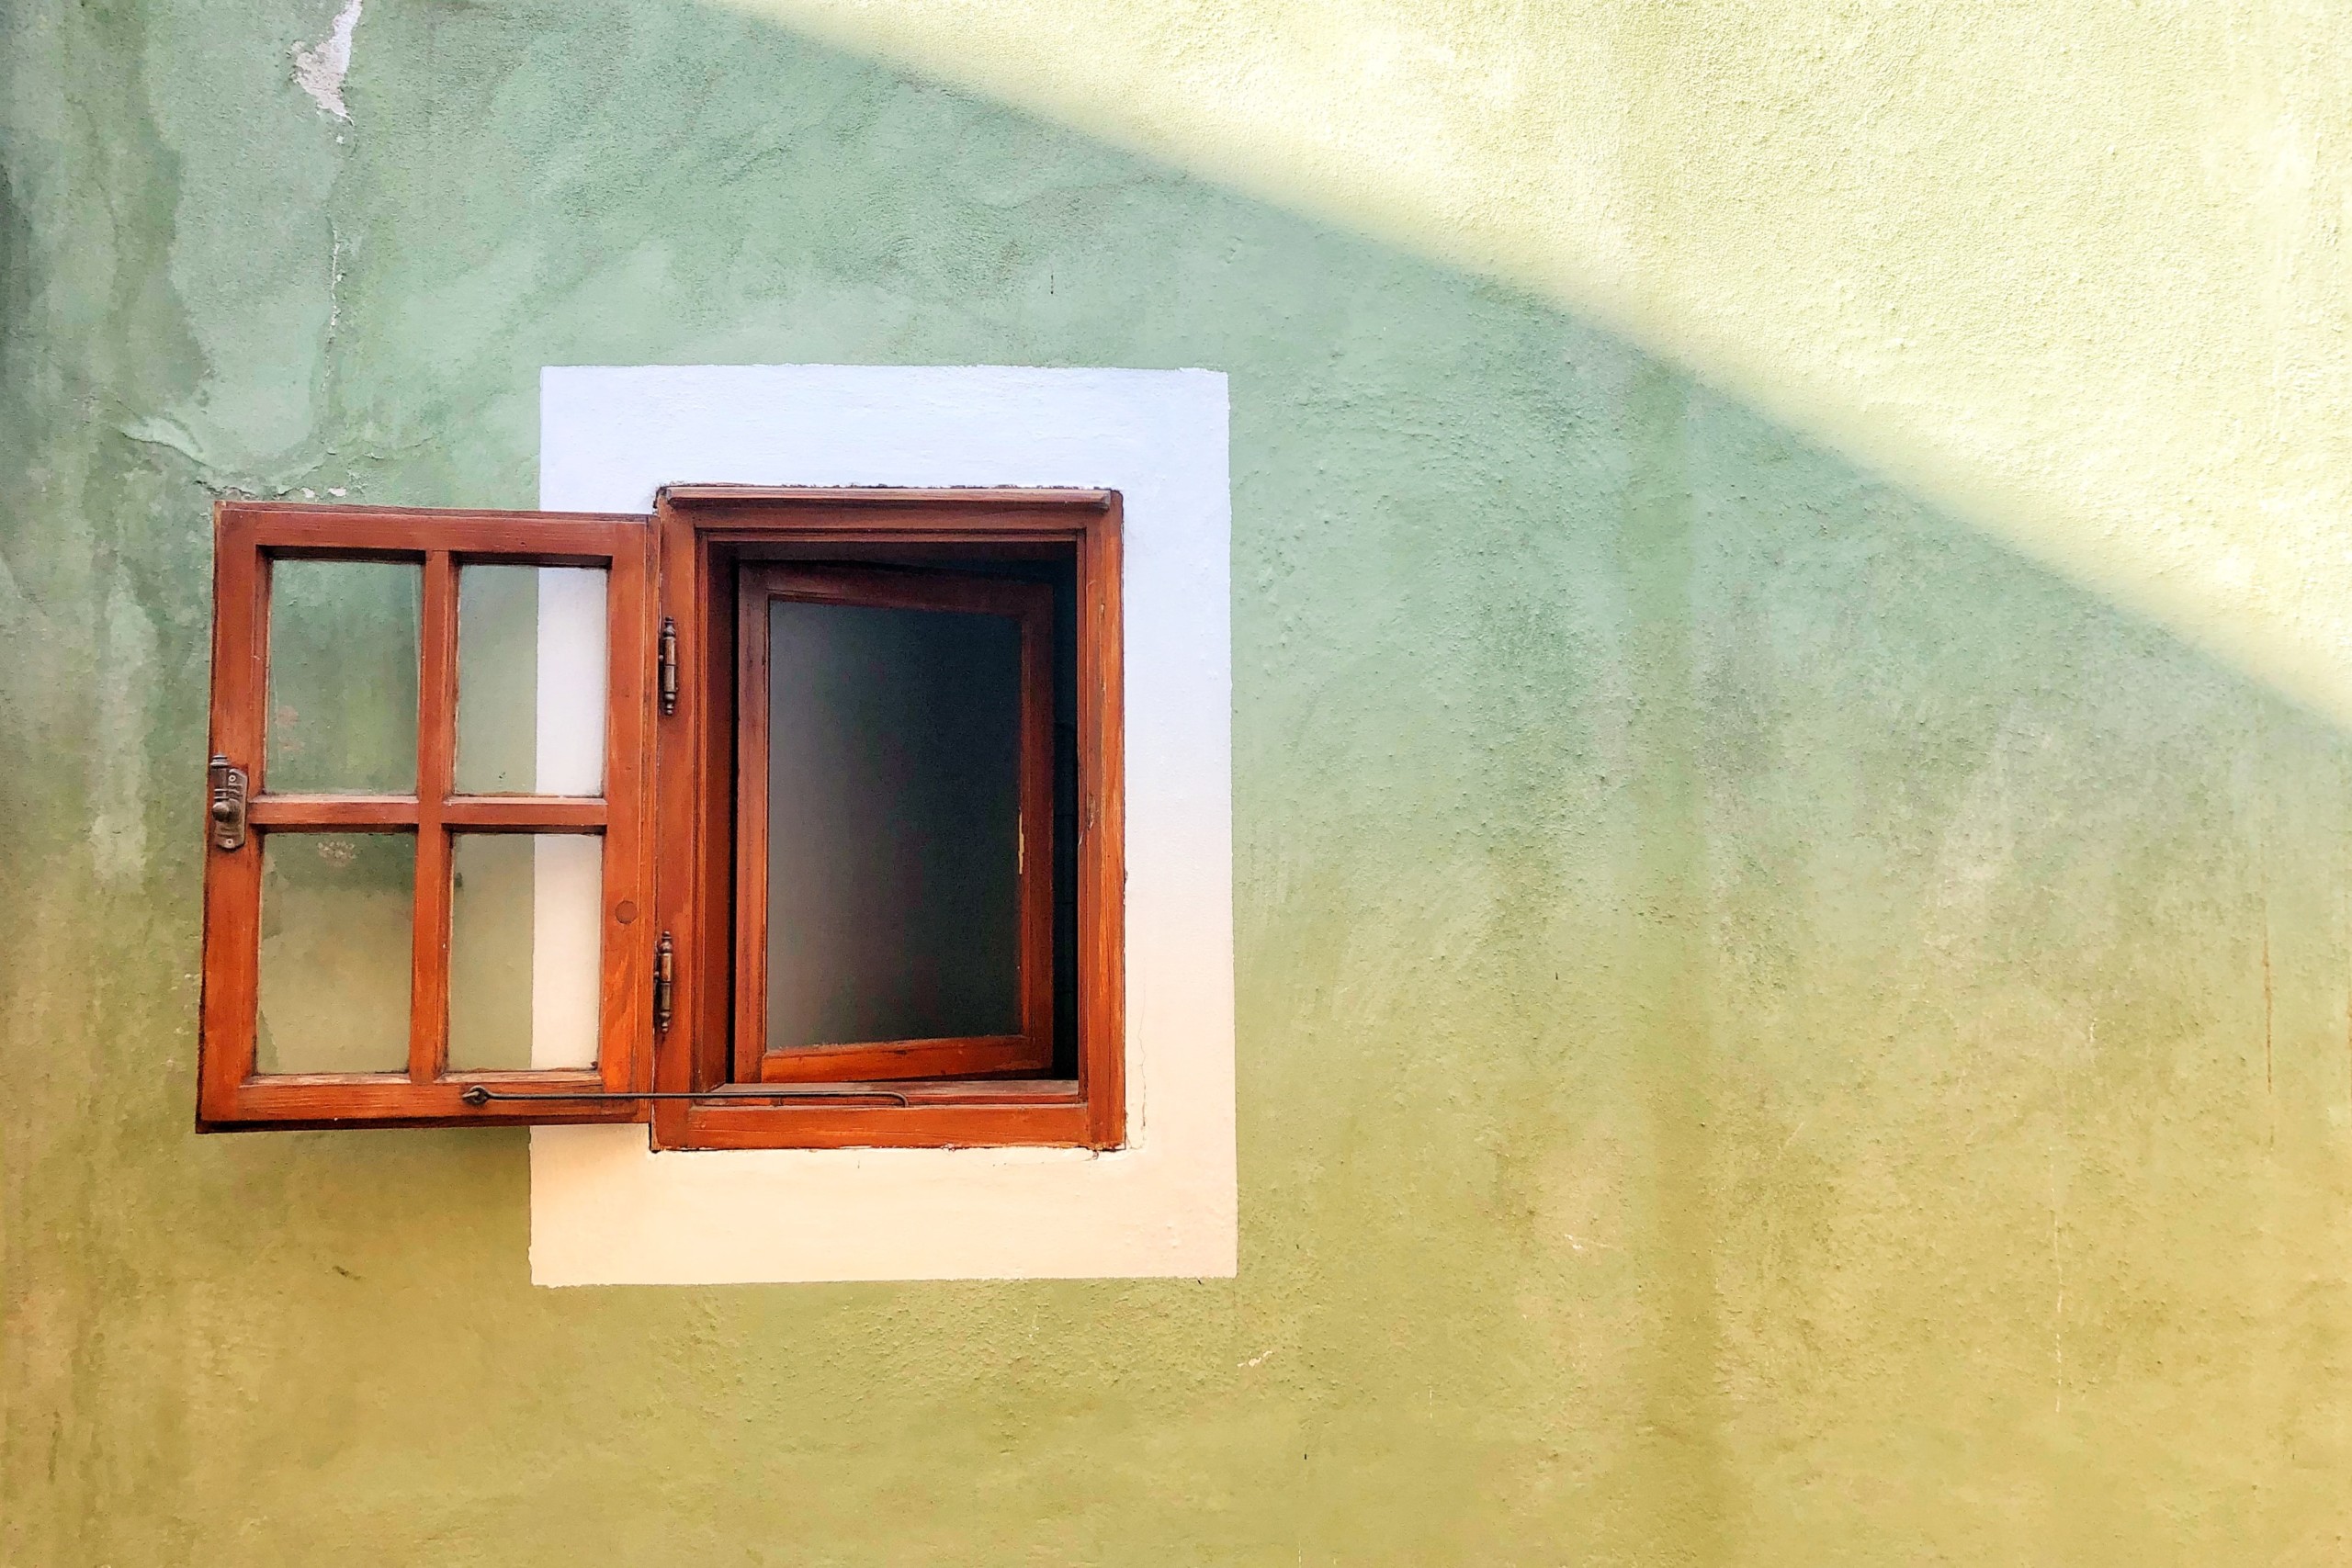 A small square window with a wood frame and wood panes is open. The view is from the outside of a plain concrete building with only the window shown off to the left side. This photograph was taken by Katerina Pavlyuc.